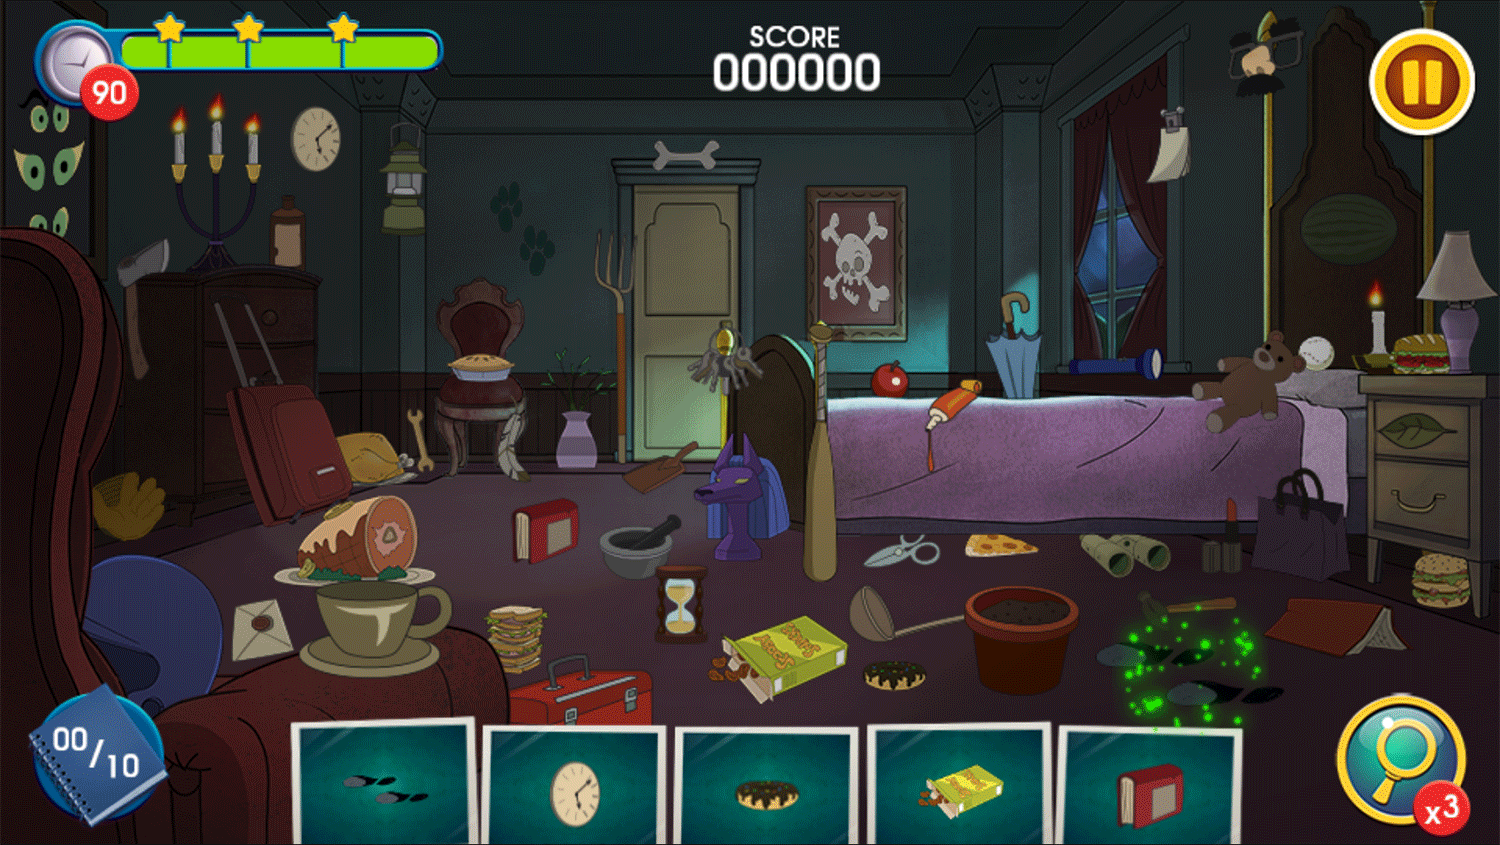 Be Cool Scooby Doo the Mysterious Mansion Game Screenshot.